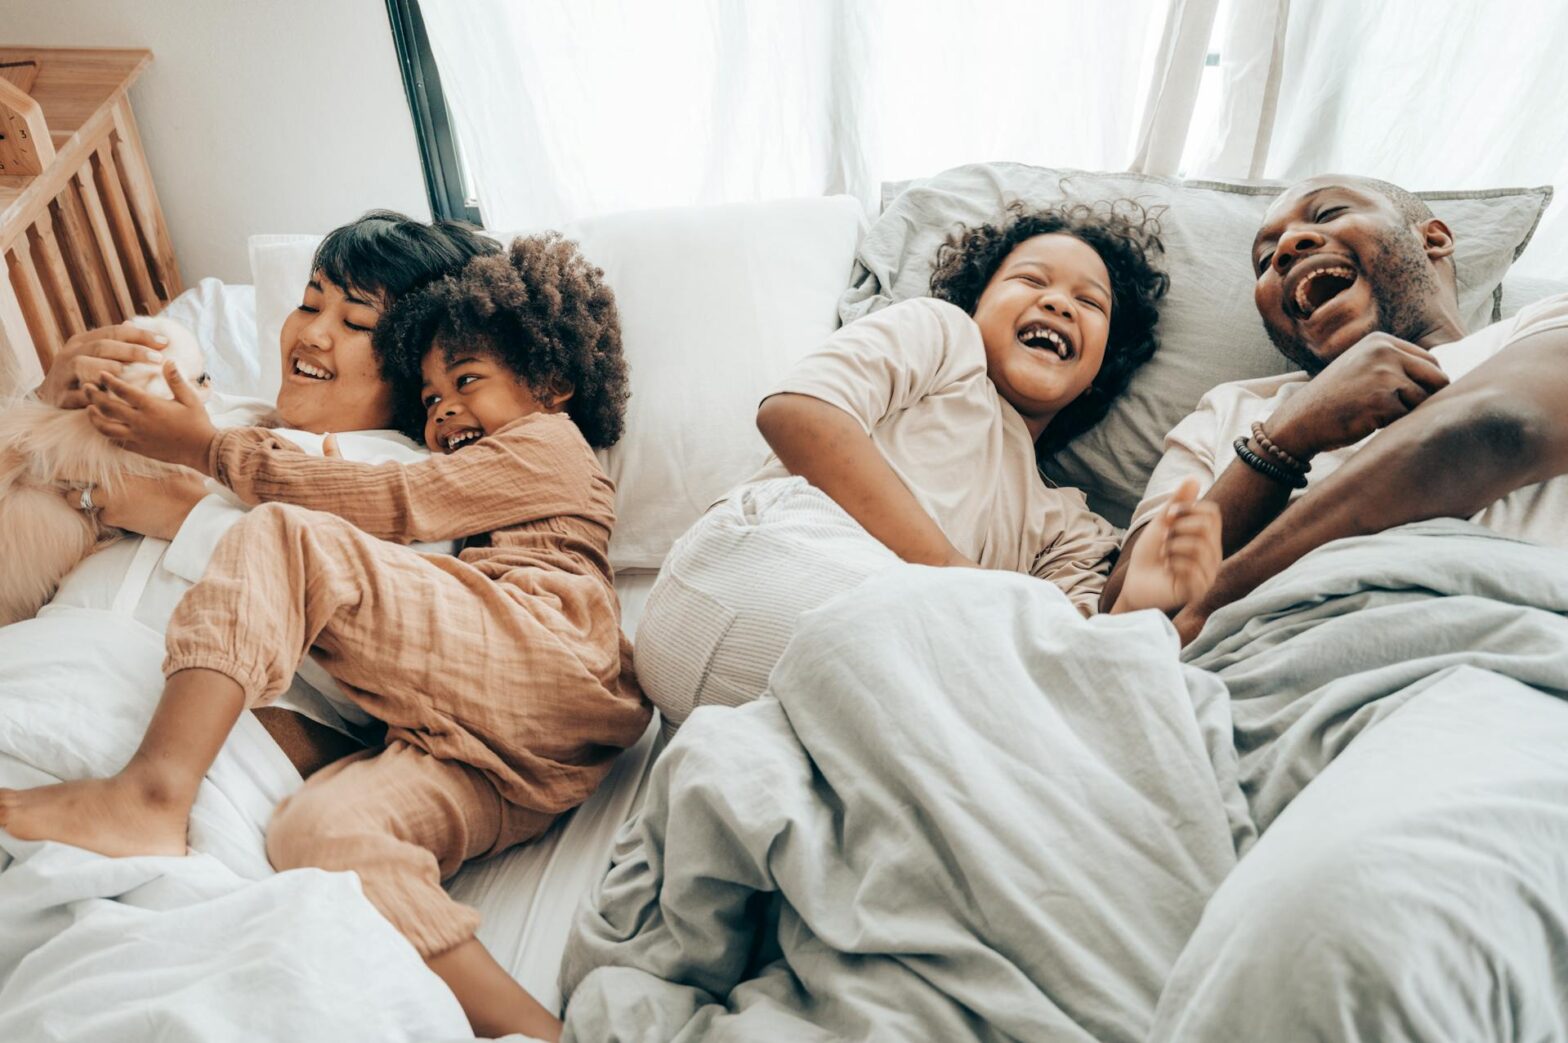 A happy multiracial family having fun together in bed